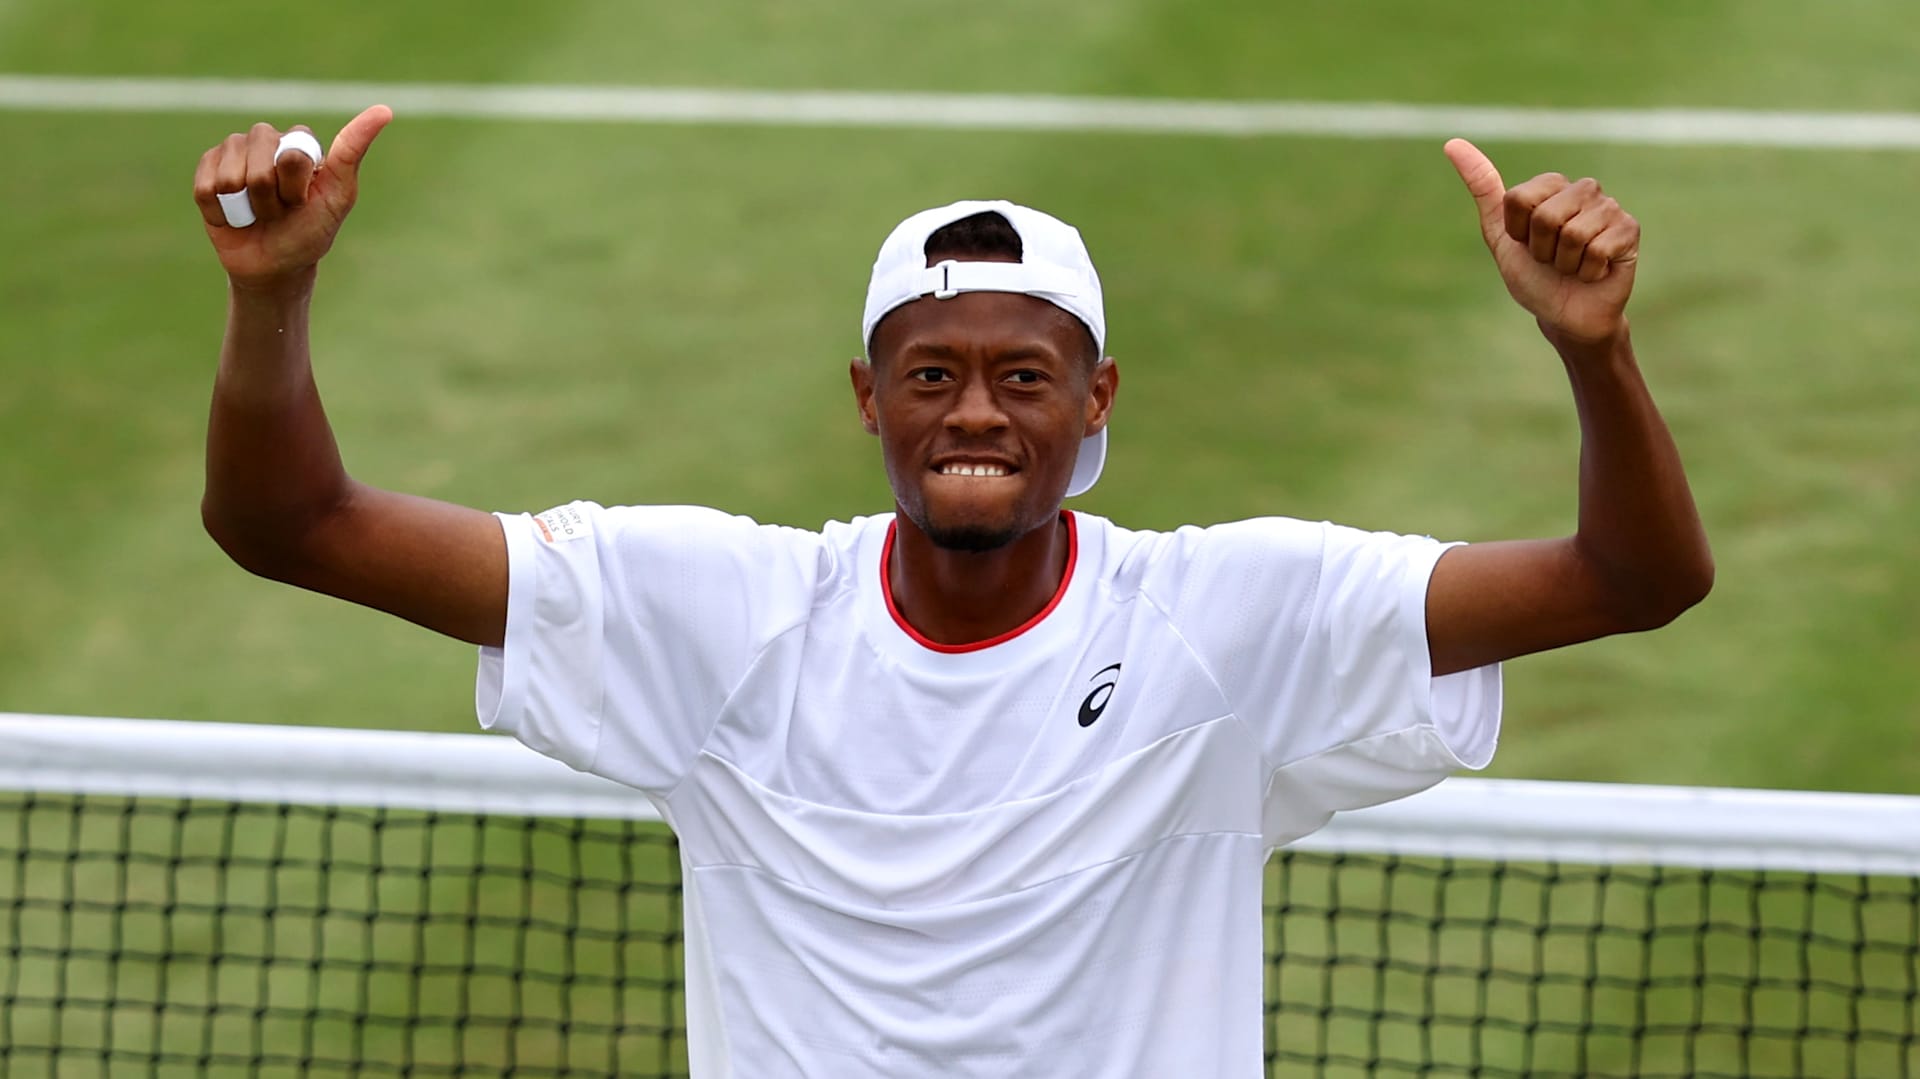 Chris Eubanks The remarkable journey of the 27-year-old American who shocked the tennis world at Wimbledon image